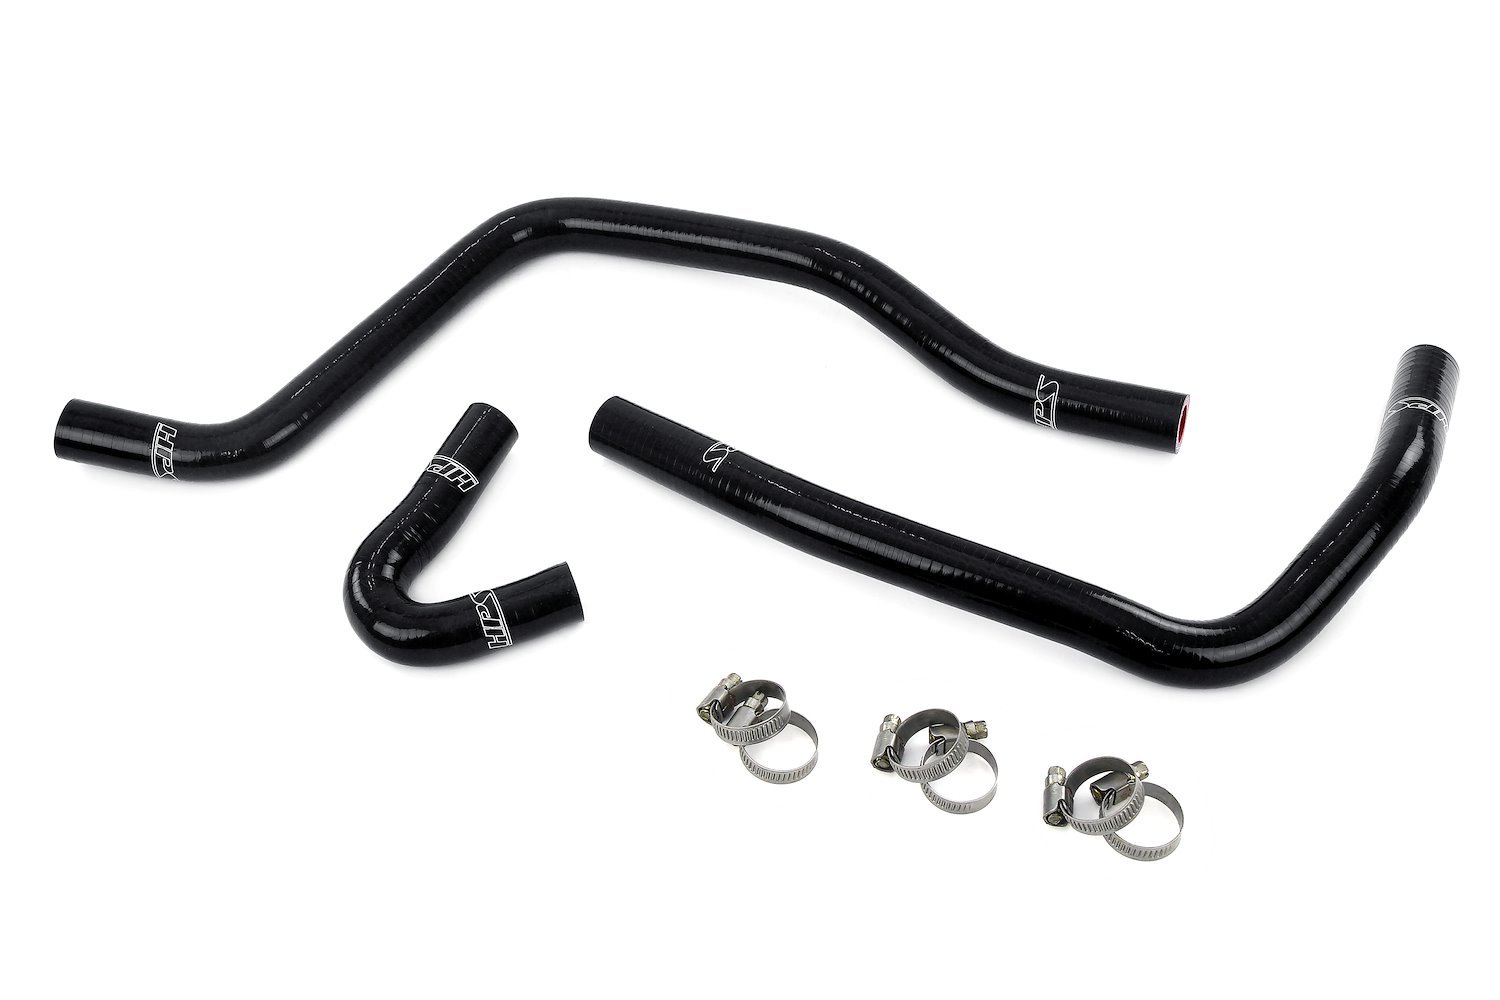 57-2120-BLK Heater Hose Kit, 3-Ply Reinforced Silicone, Replaces OEM Rubber Heater Coolant Hoses